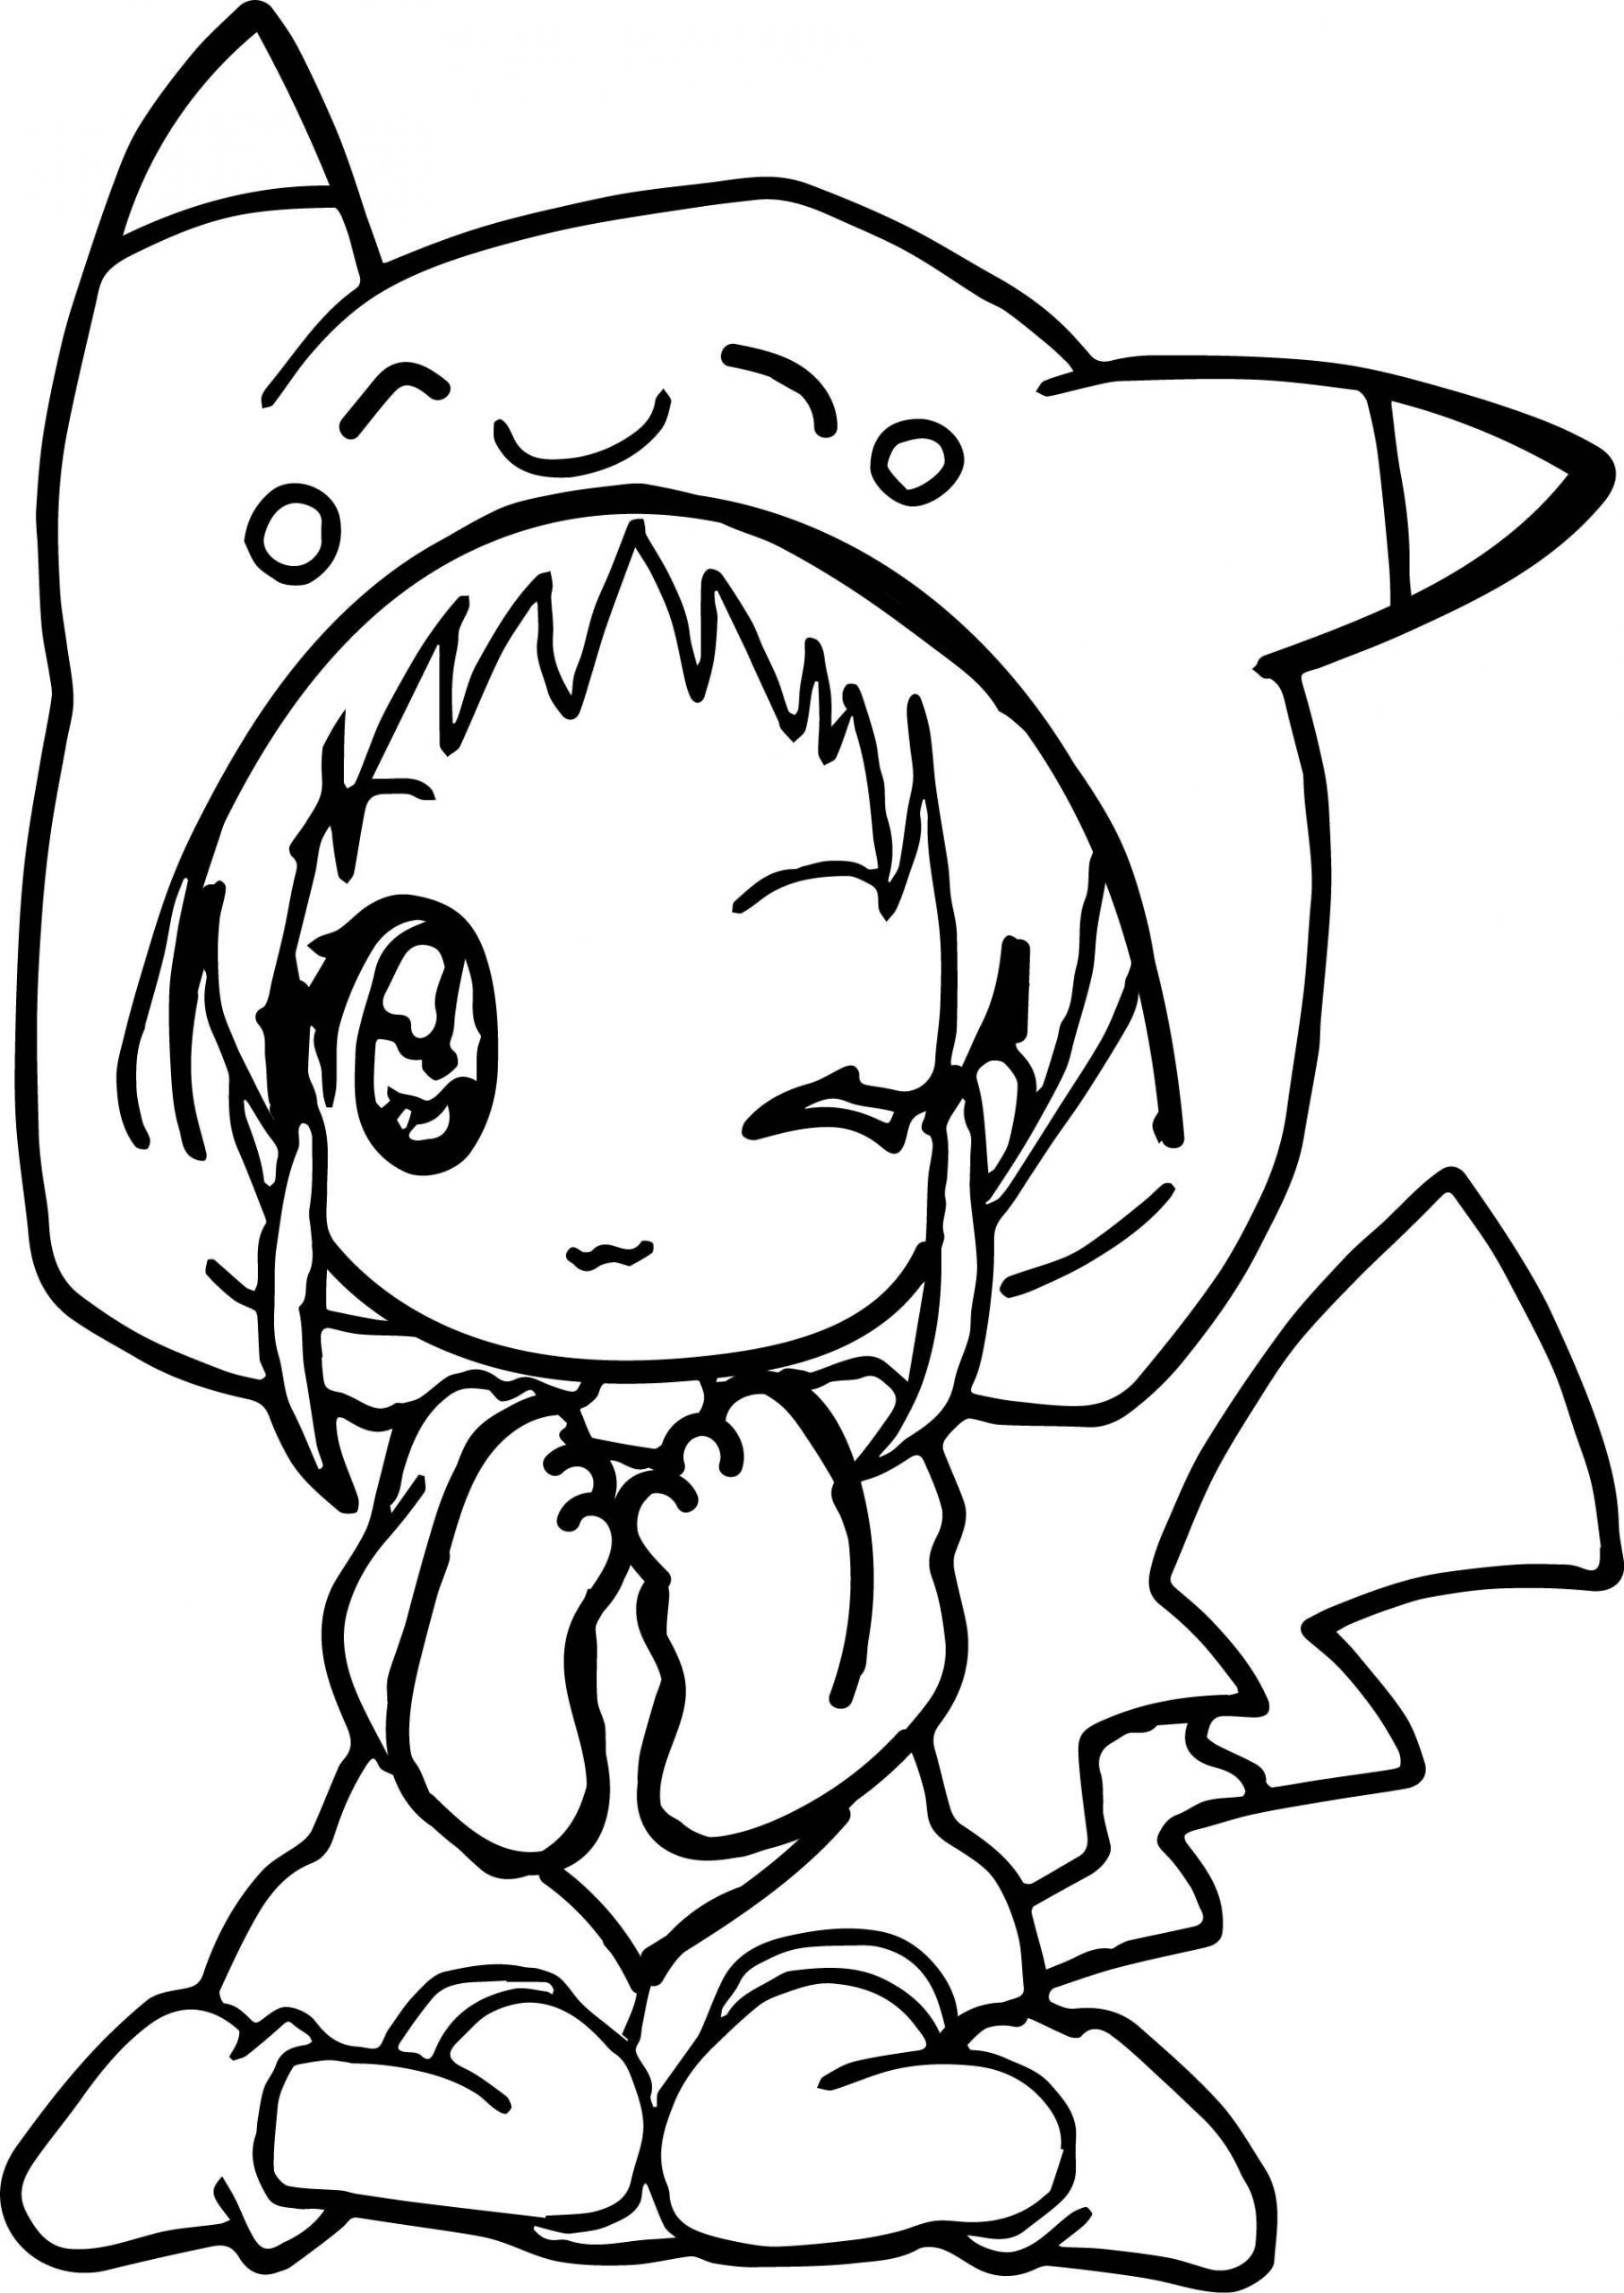 Cute Animal Coloring Pages For Girls
 Anime Girl Pikachu Dress Coloring Page in 2019